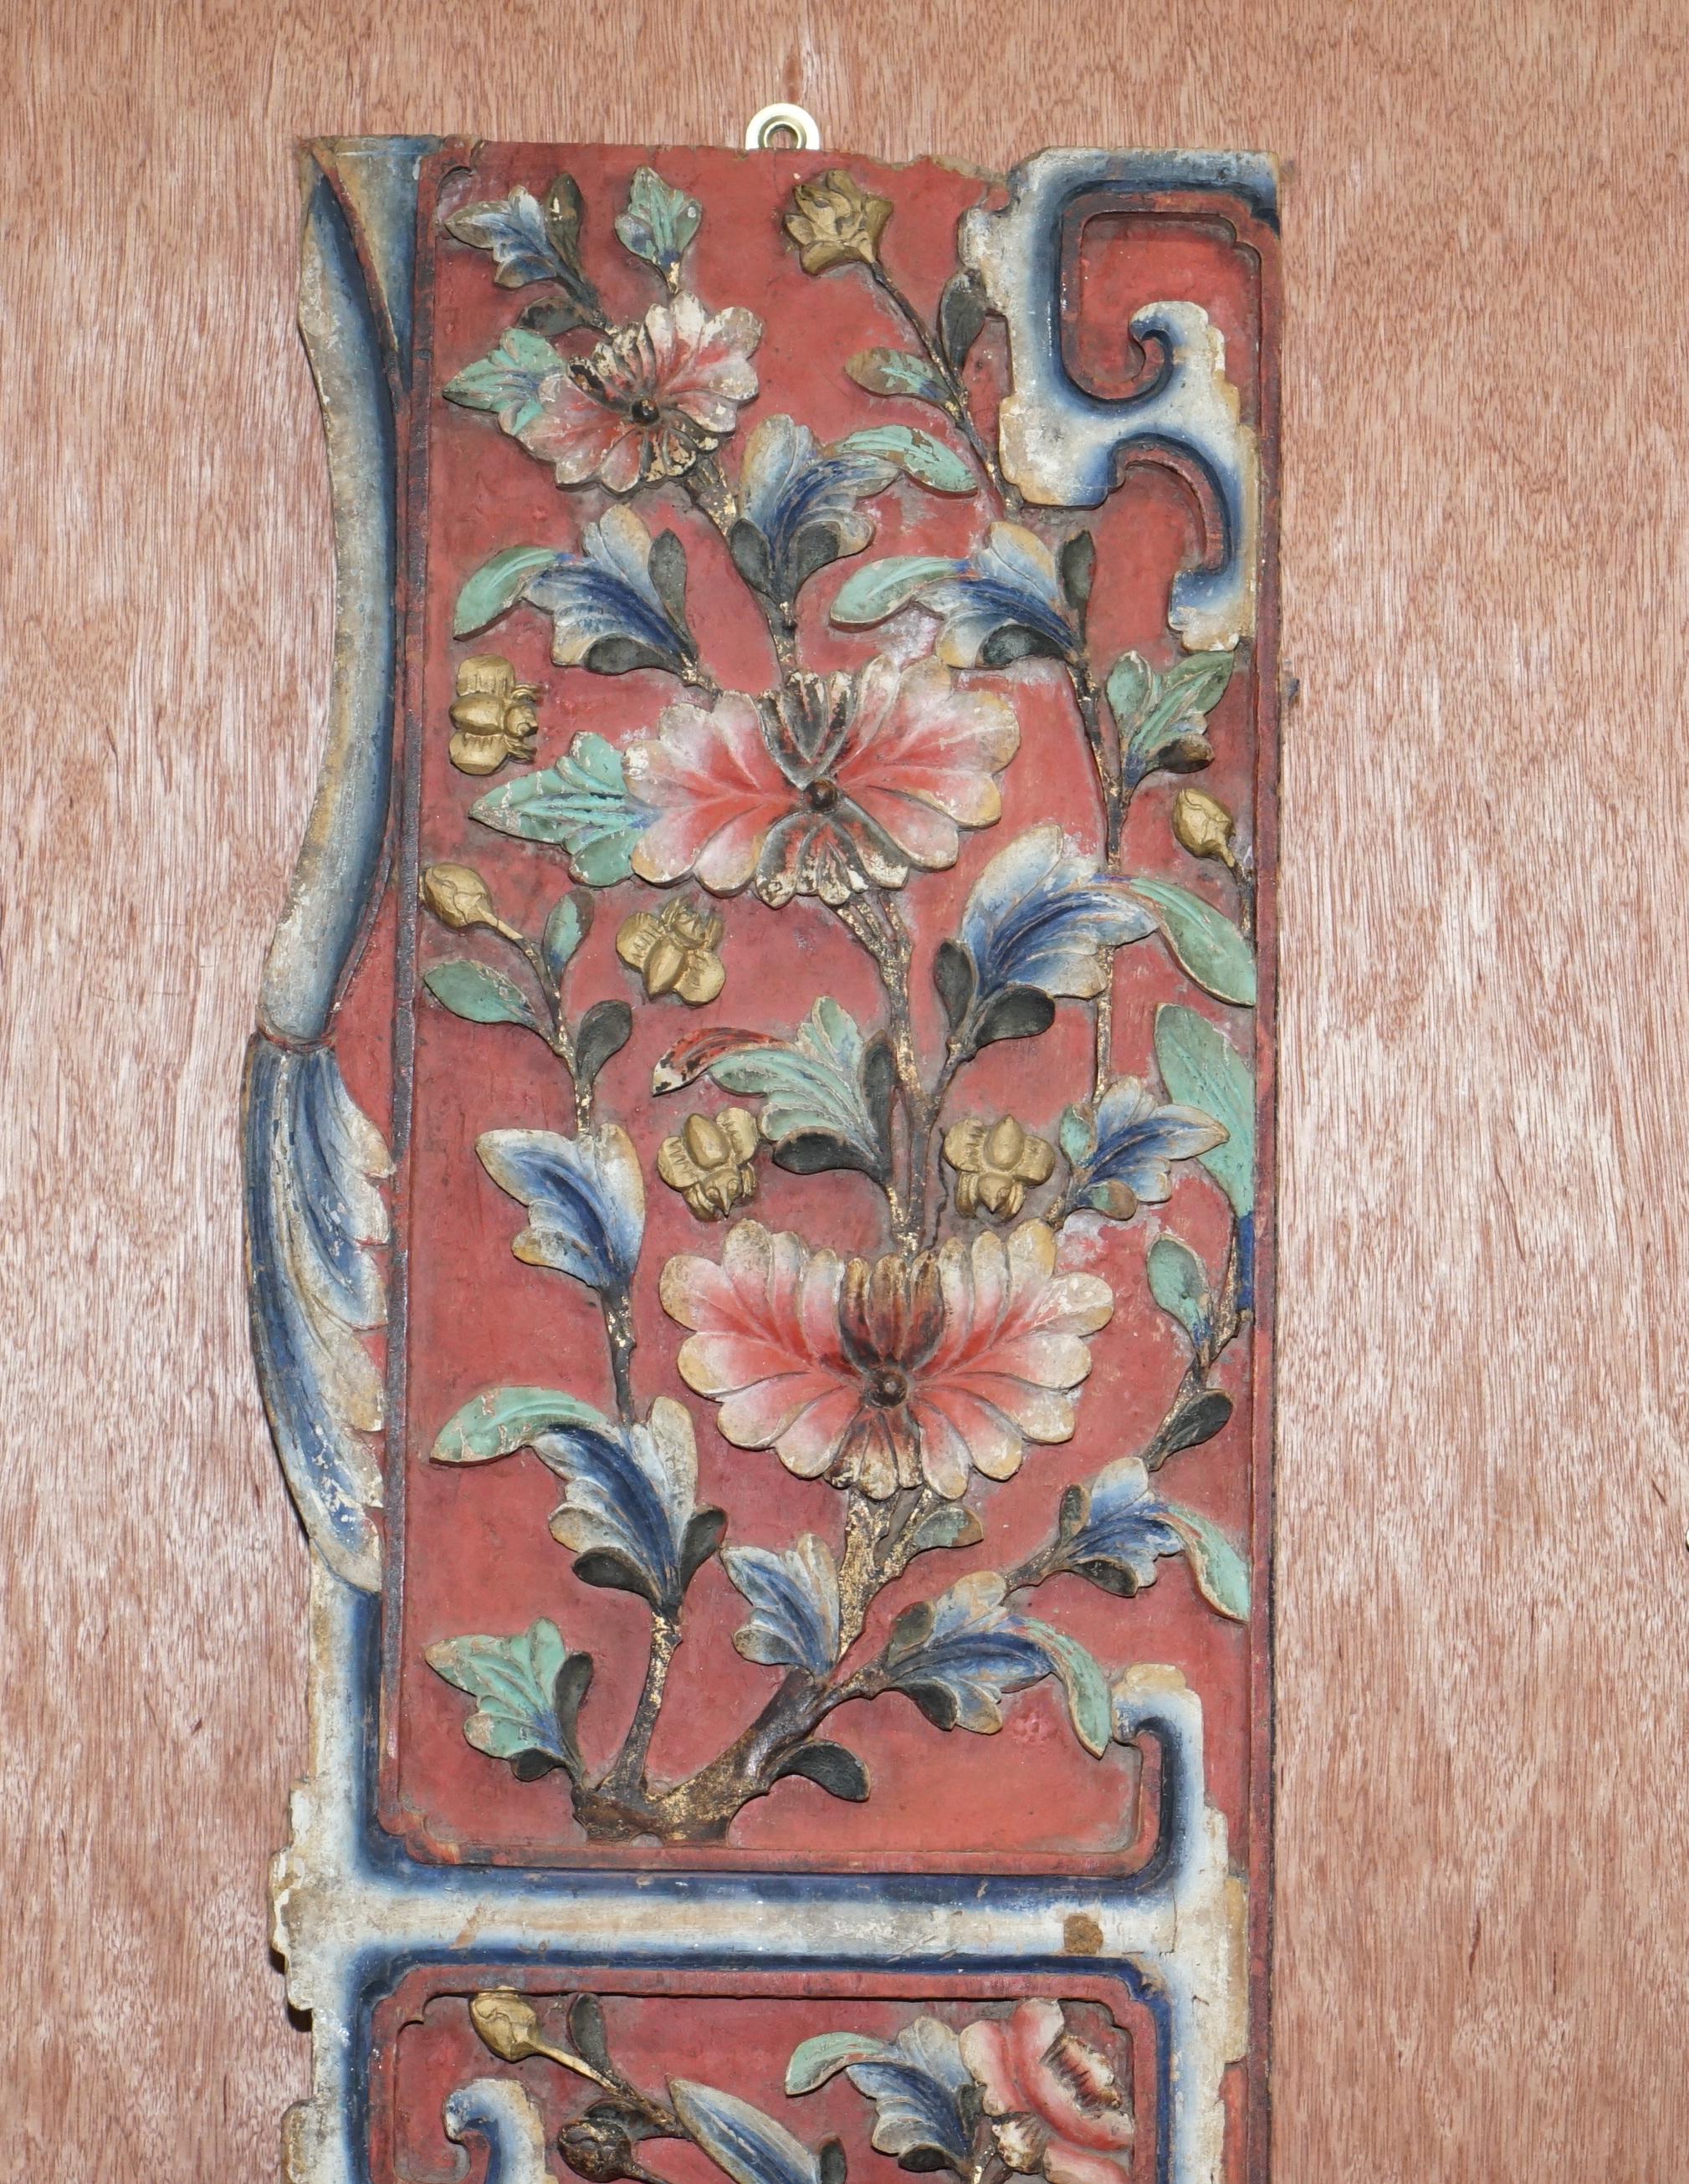 We are delighted to offer for sale this lovely circa 1860 hand carved and painted Chinese wall panel

A very good looking and well made piece, would suit any setting

We have nightly cleaned waxed and polished it, it is in perfect period